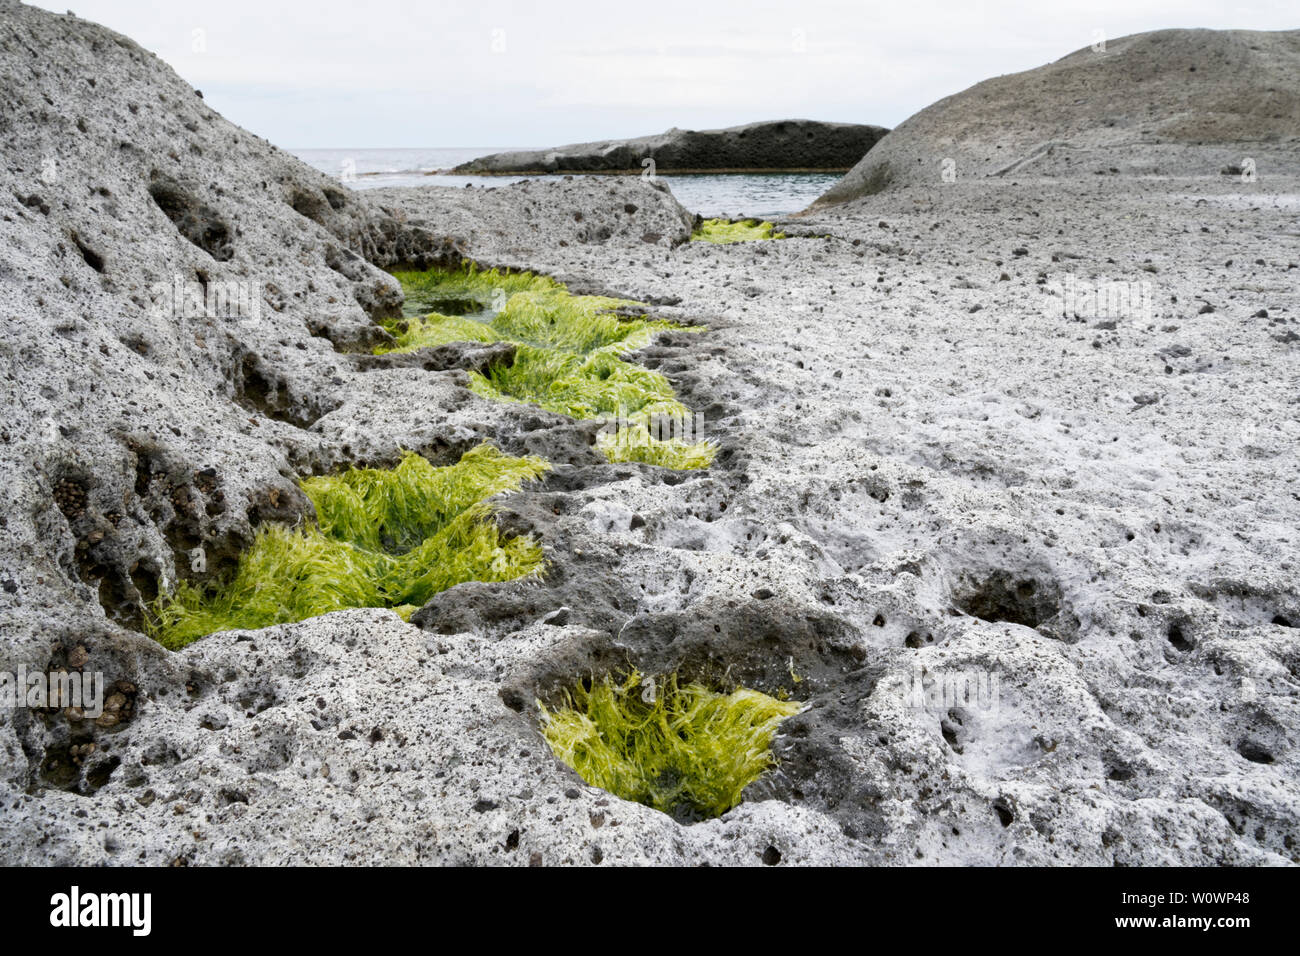 Surreal vulcanic moon landscape (vulcanic ground) Cane Malu at Bosa in Italy (Sardegna) with algea plants growing out of holes. Stock Photo